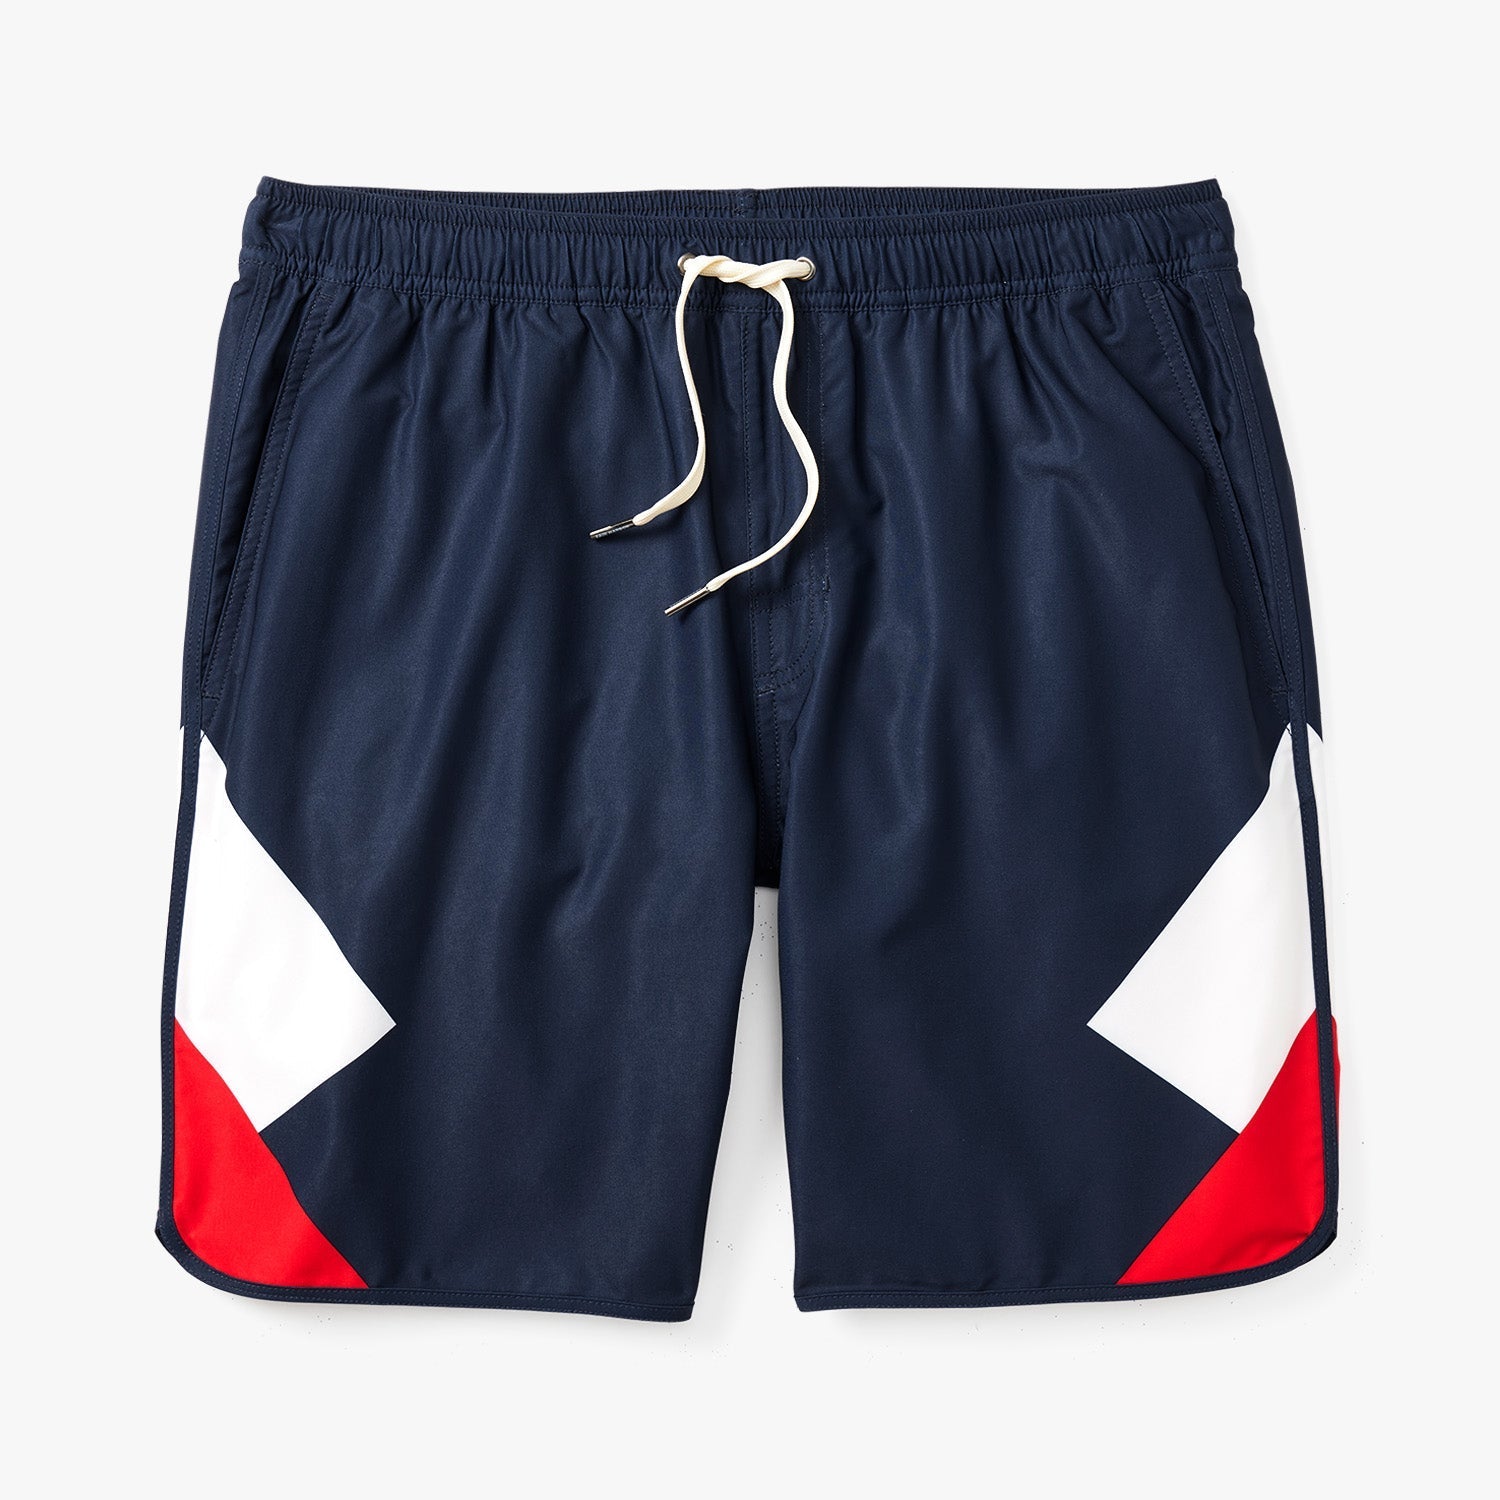 The Anchor Short | Swim Suit With Liners | Fair Harbor